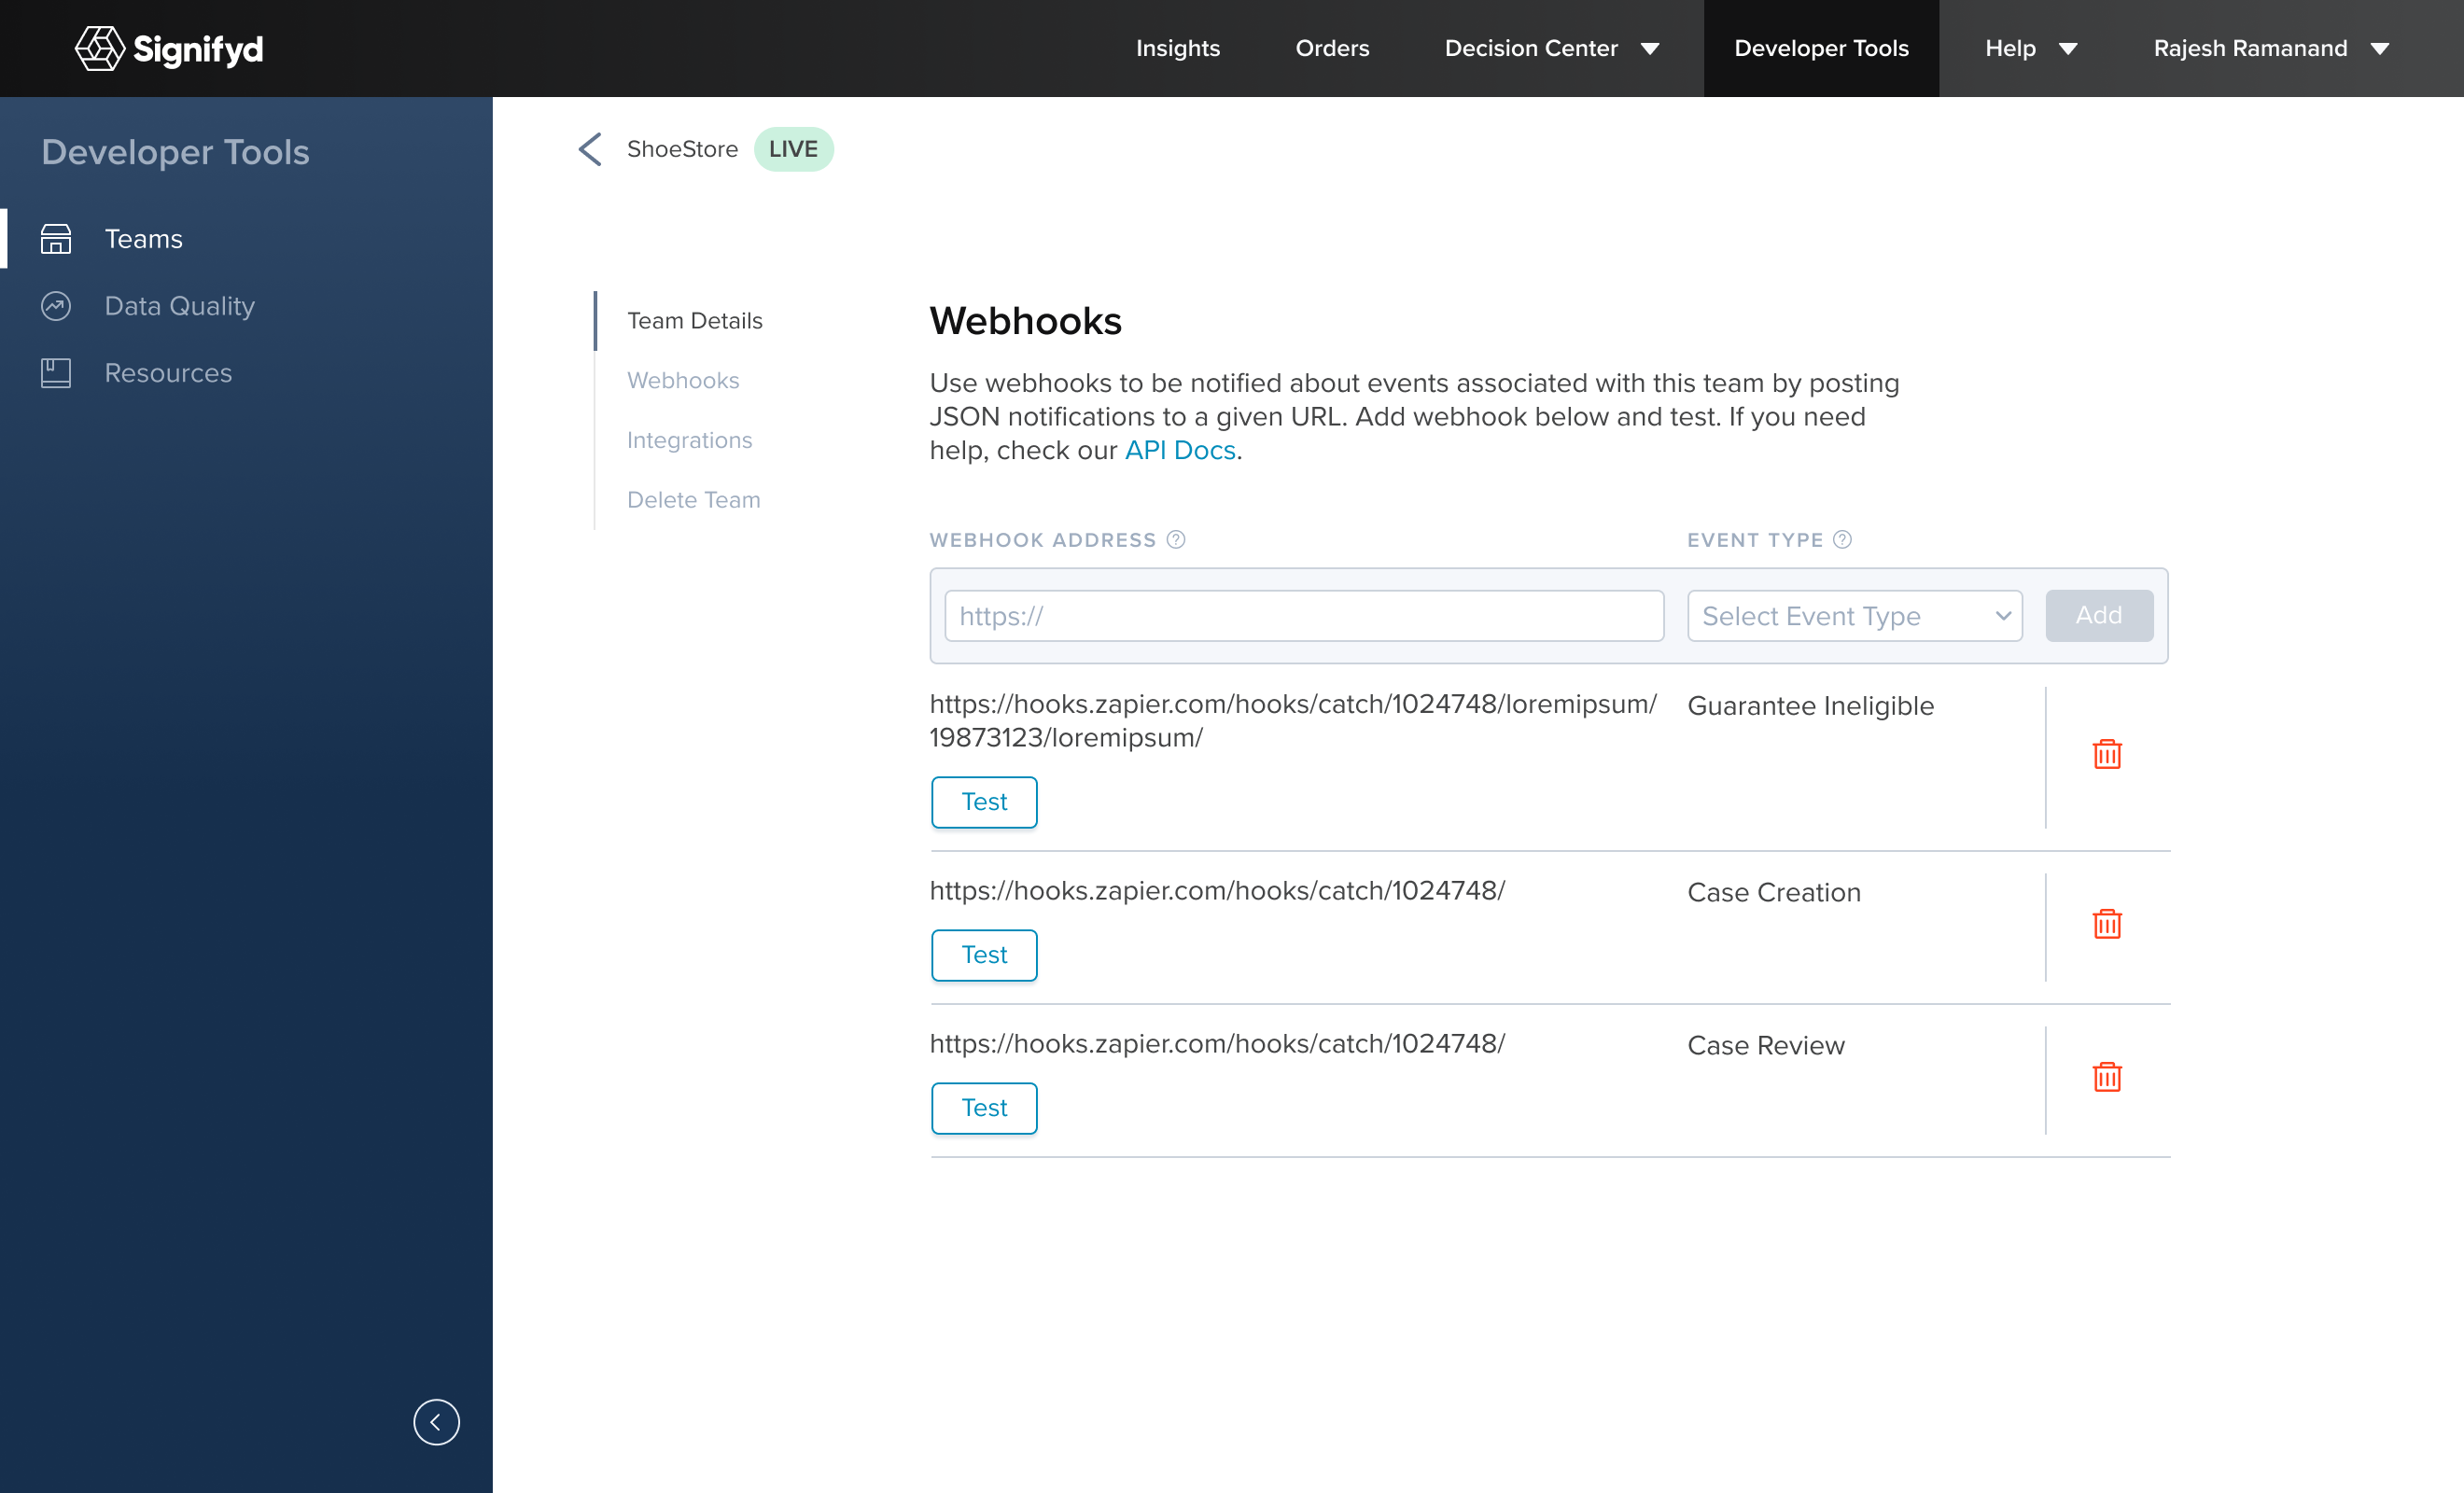 Webhooks for each team can be set up via Settings in the Developer Tools web app.